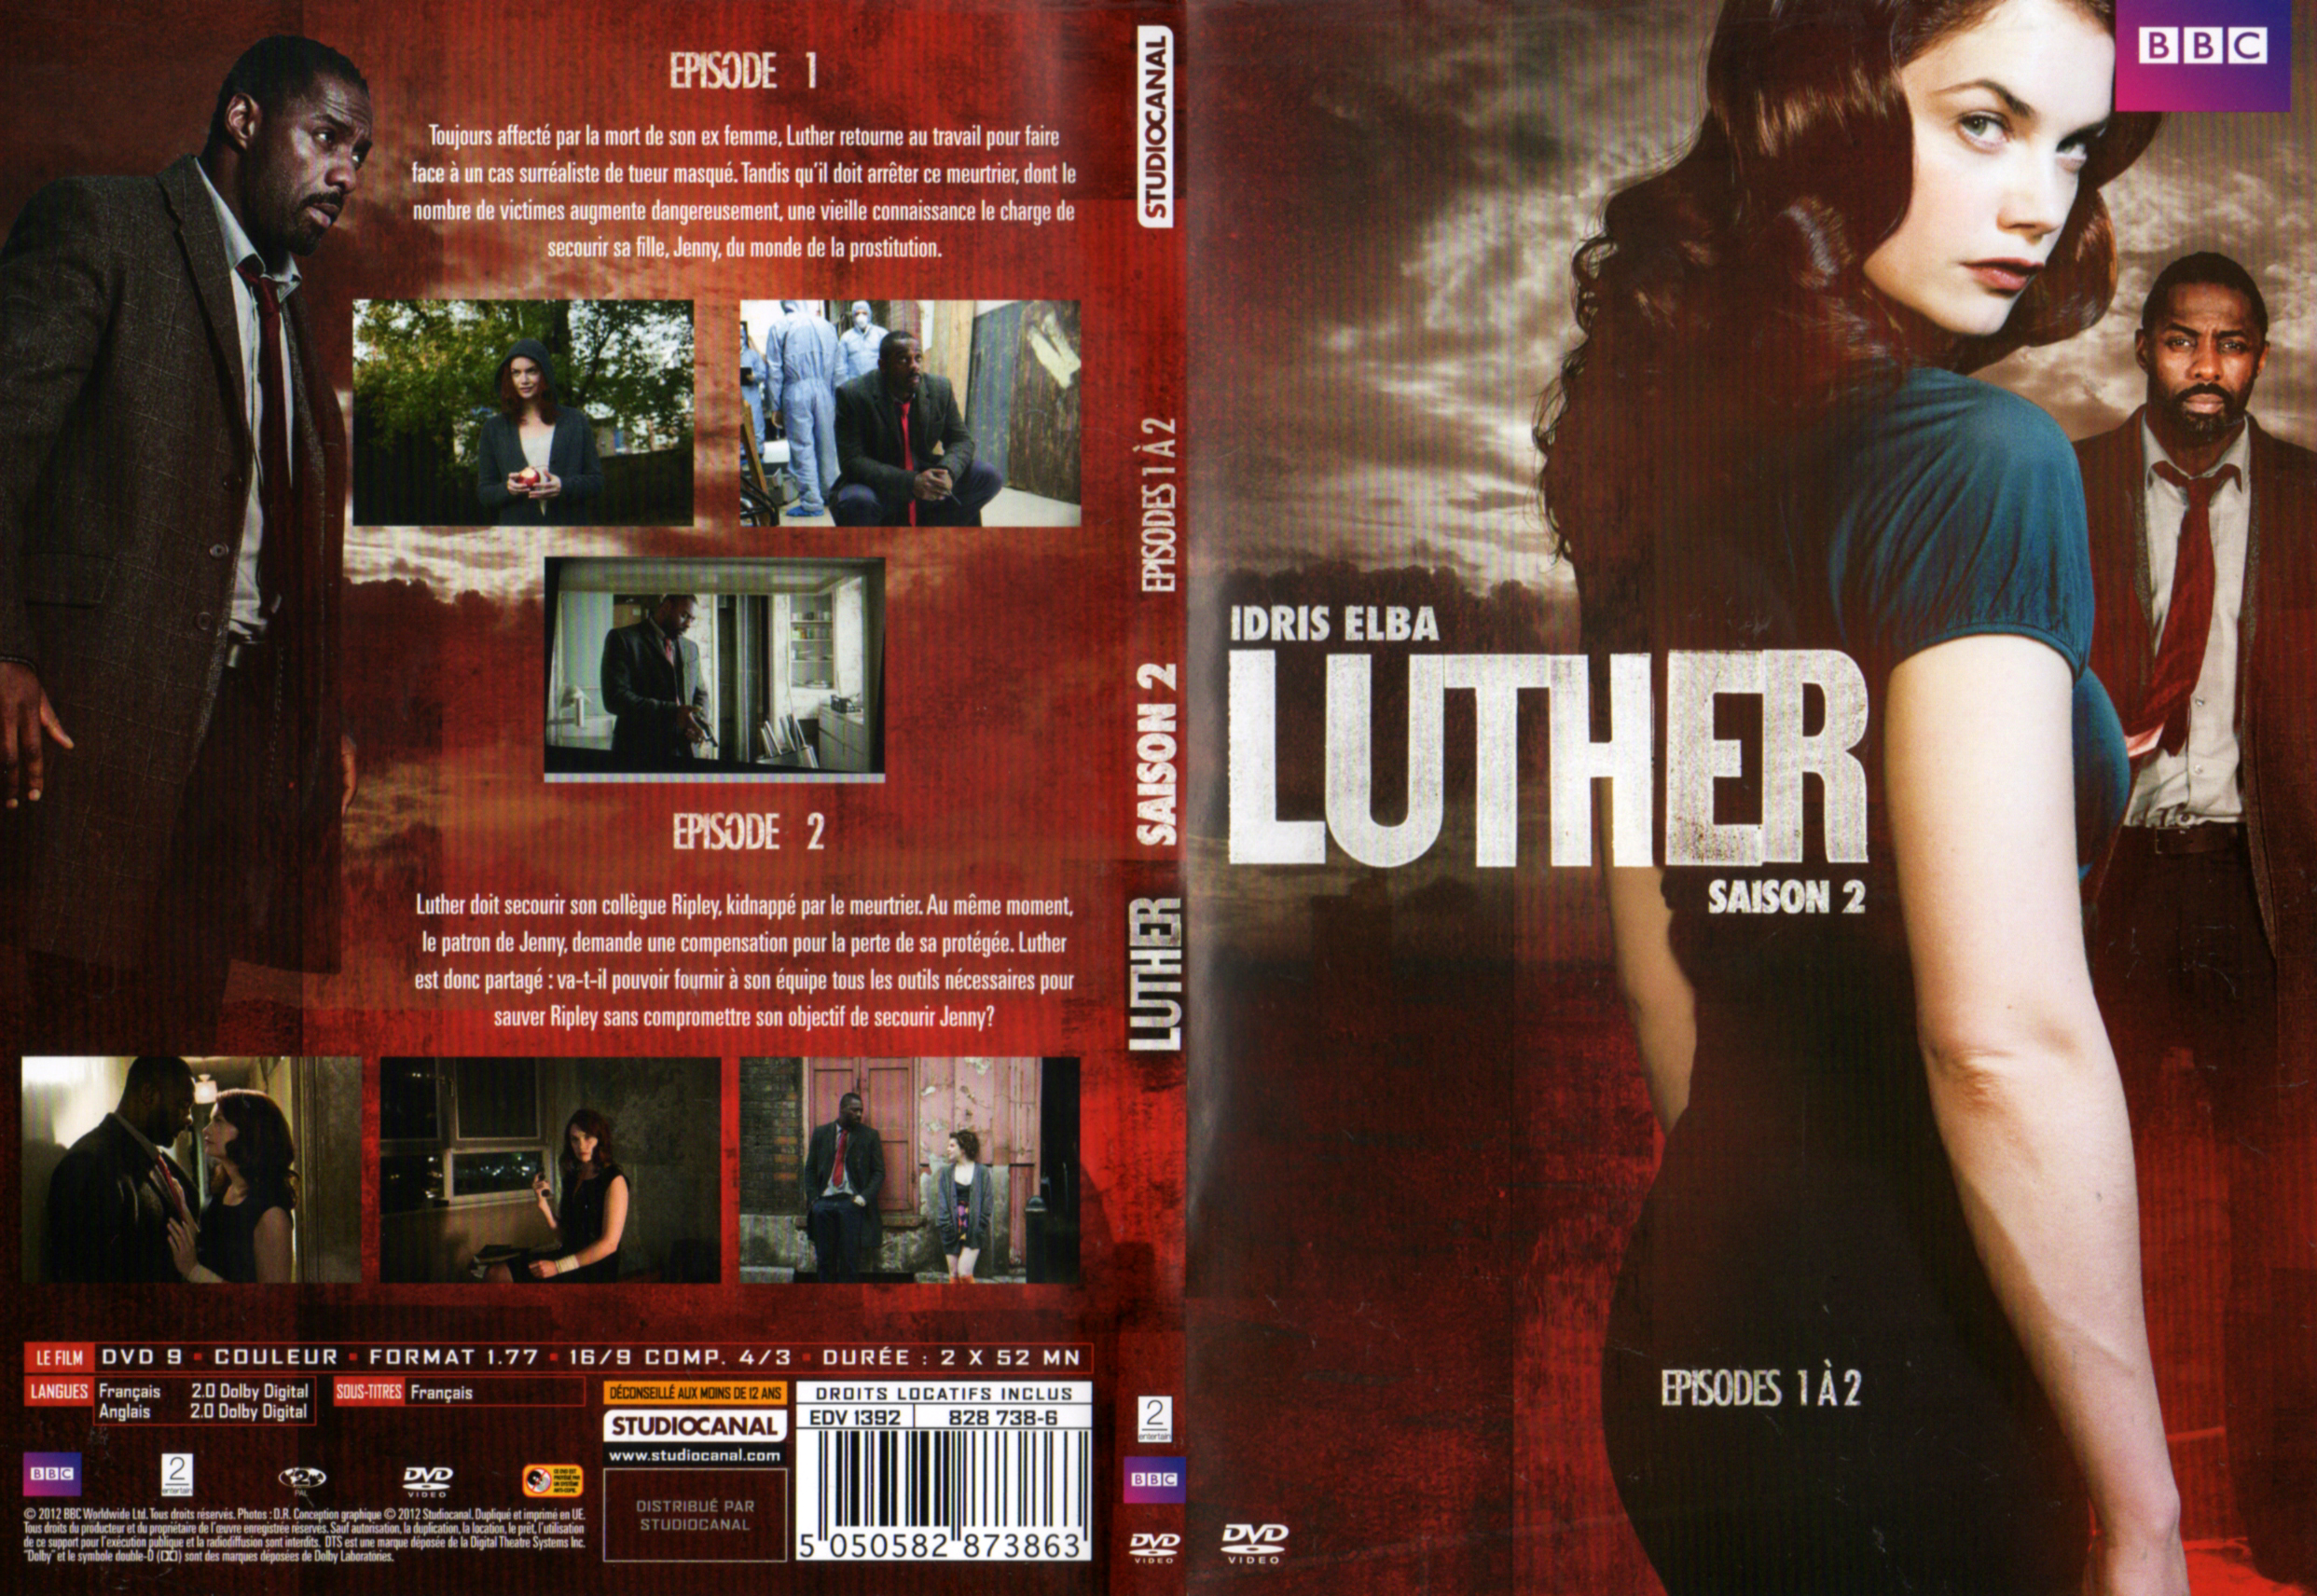 Jaquette DVD Luther Saison 2 Ep 1-2